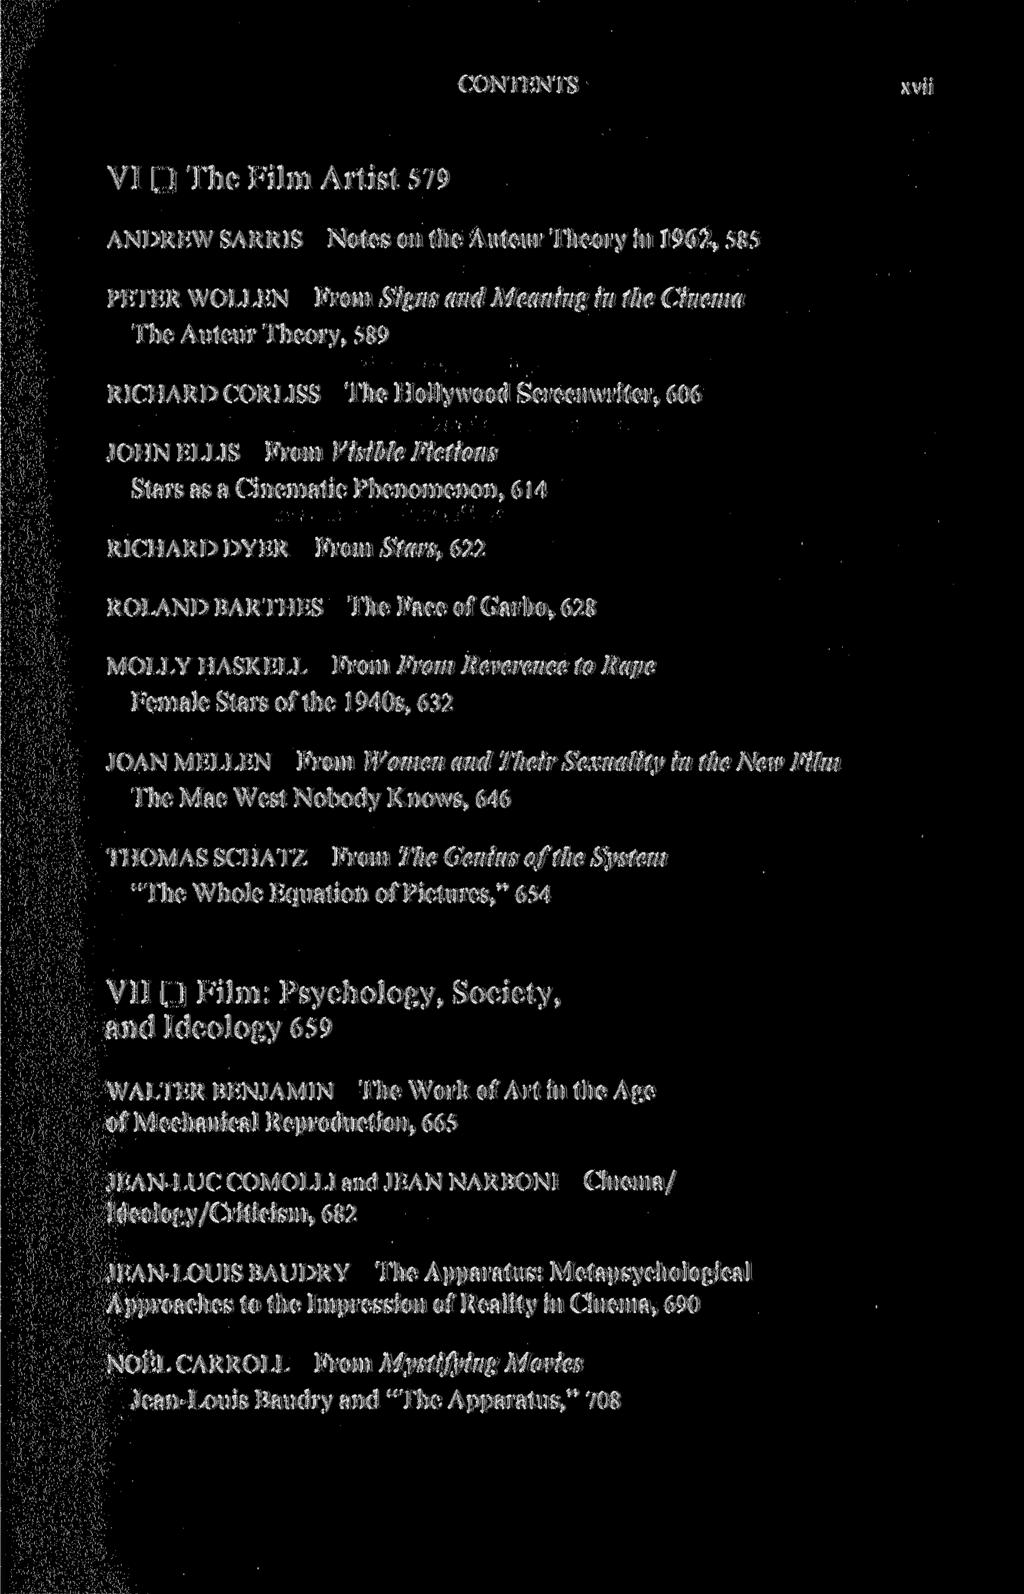 CONTENTS xvii VI The Film Artist 579 ANDREW SARRIS Notes on the Auteur Theory in 1962, 585 PETER WOLLEN From Signs and Meaning in the Cinema The Auteur Theory, 589 RICHARD CORLISS The Hollywood